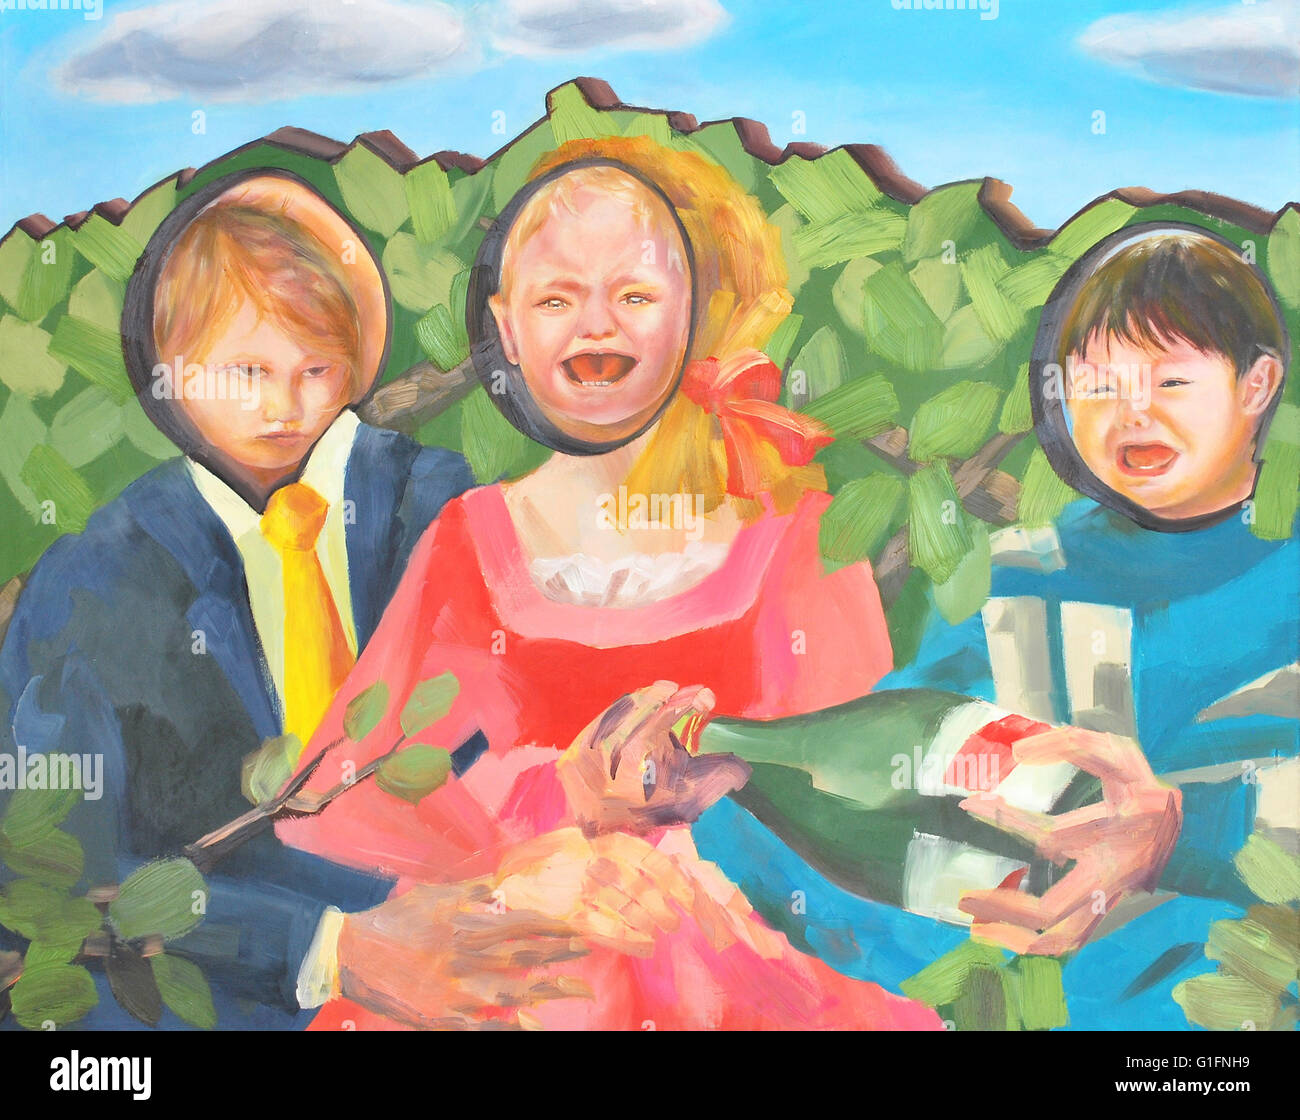 oil painting concept art children placed in wrong positions conceptual art illustrating conflict between individual and society Stock Photo